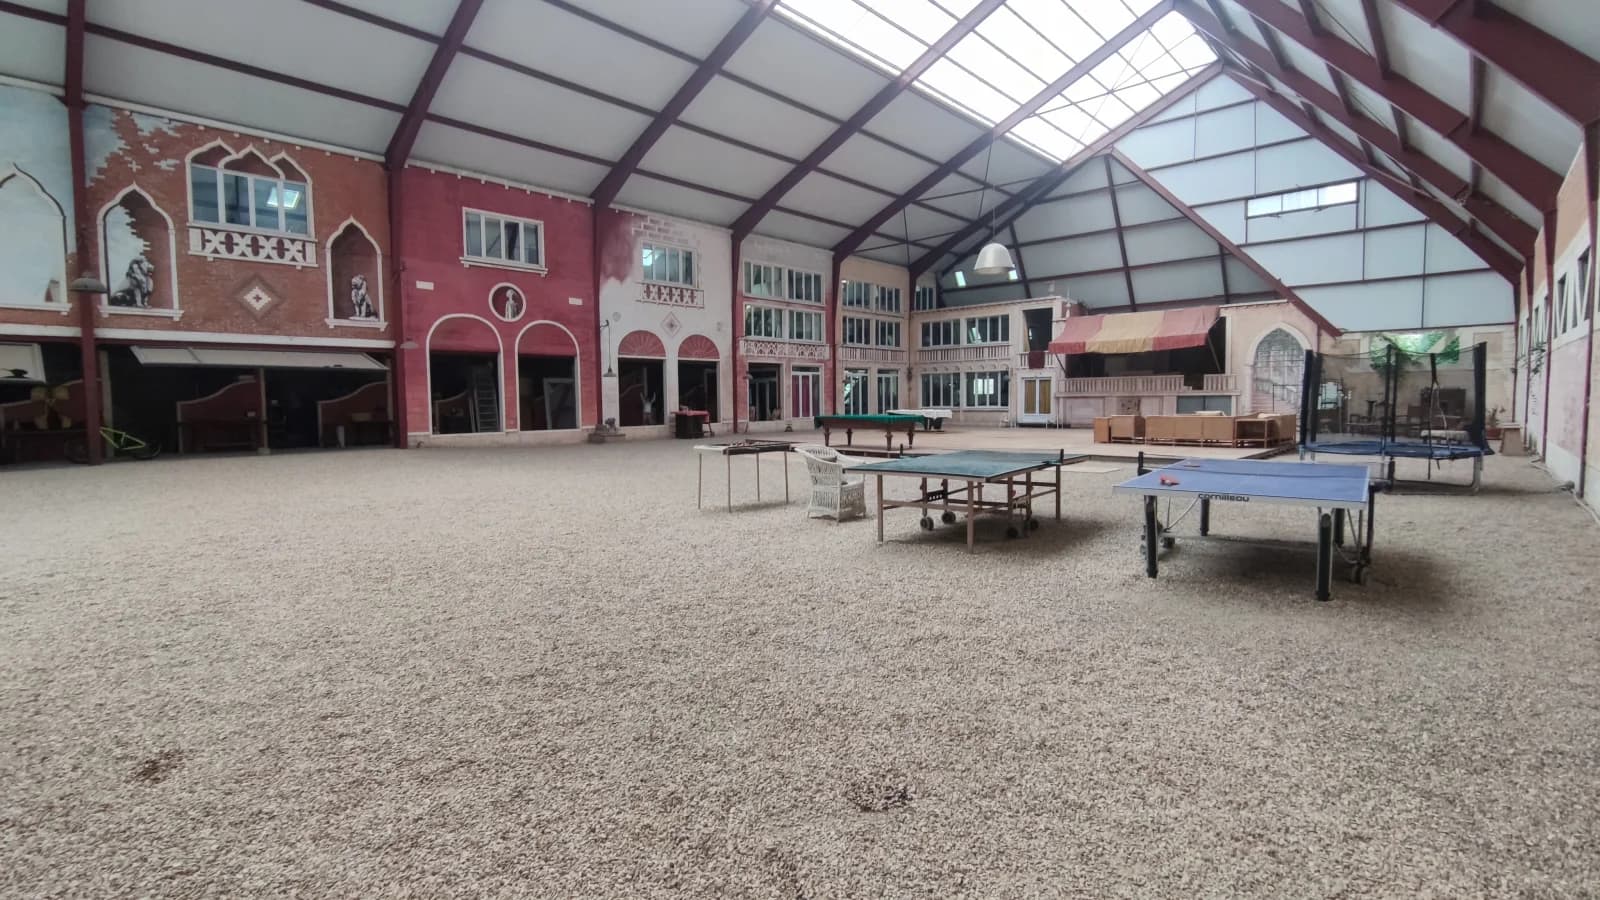 Meeting room in former horse riding arena - 1